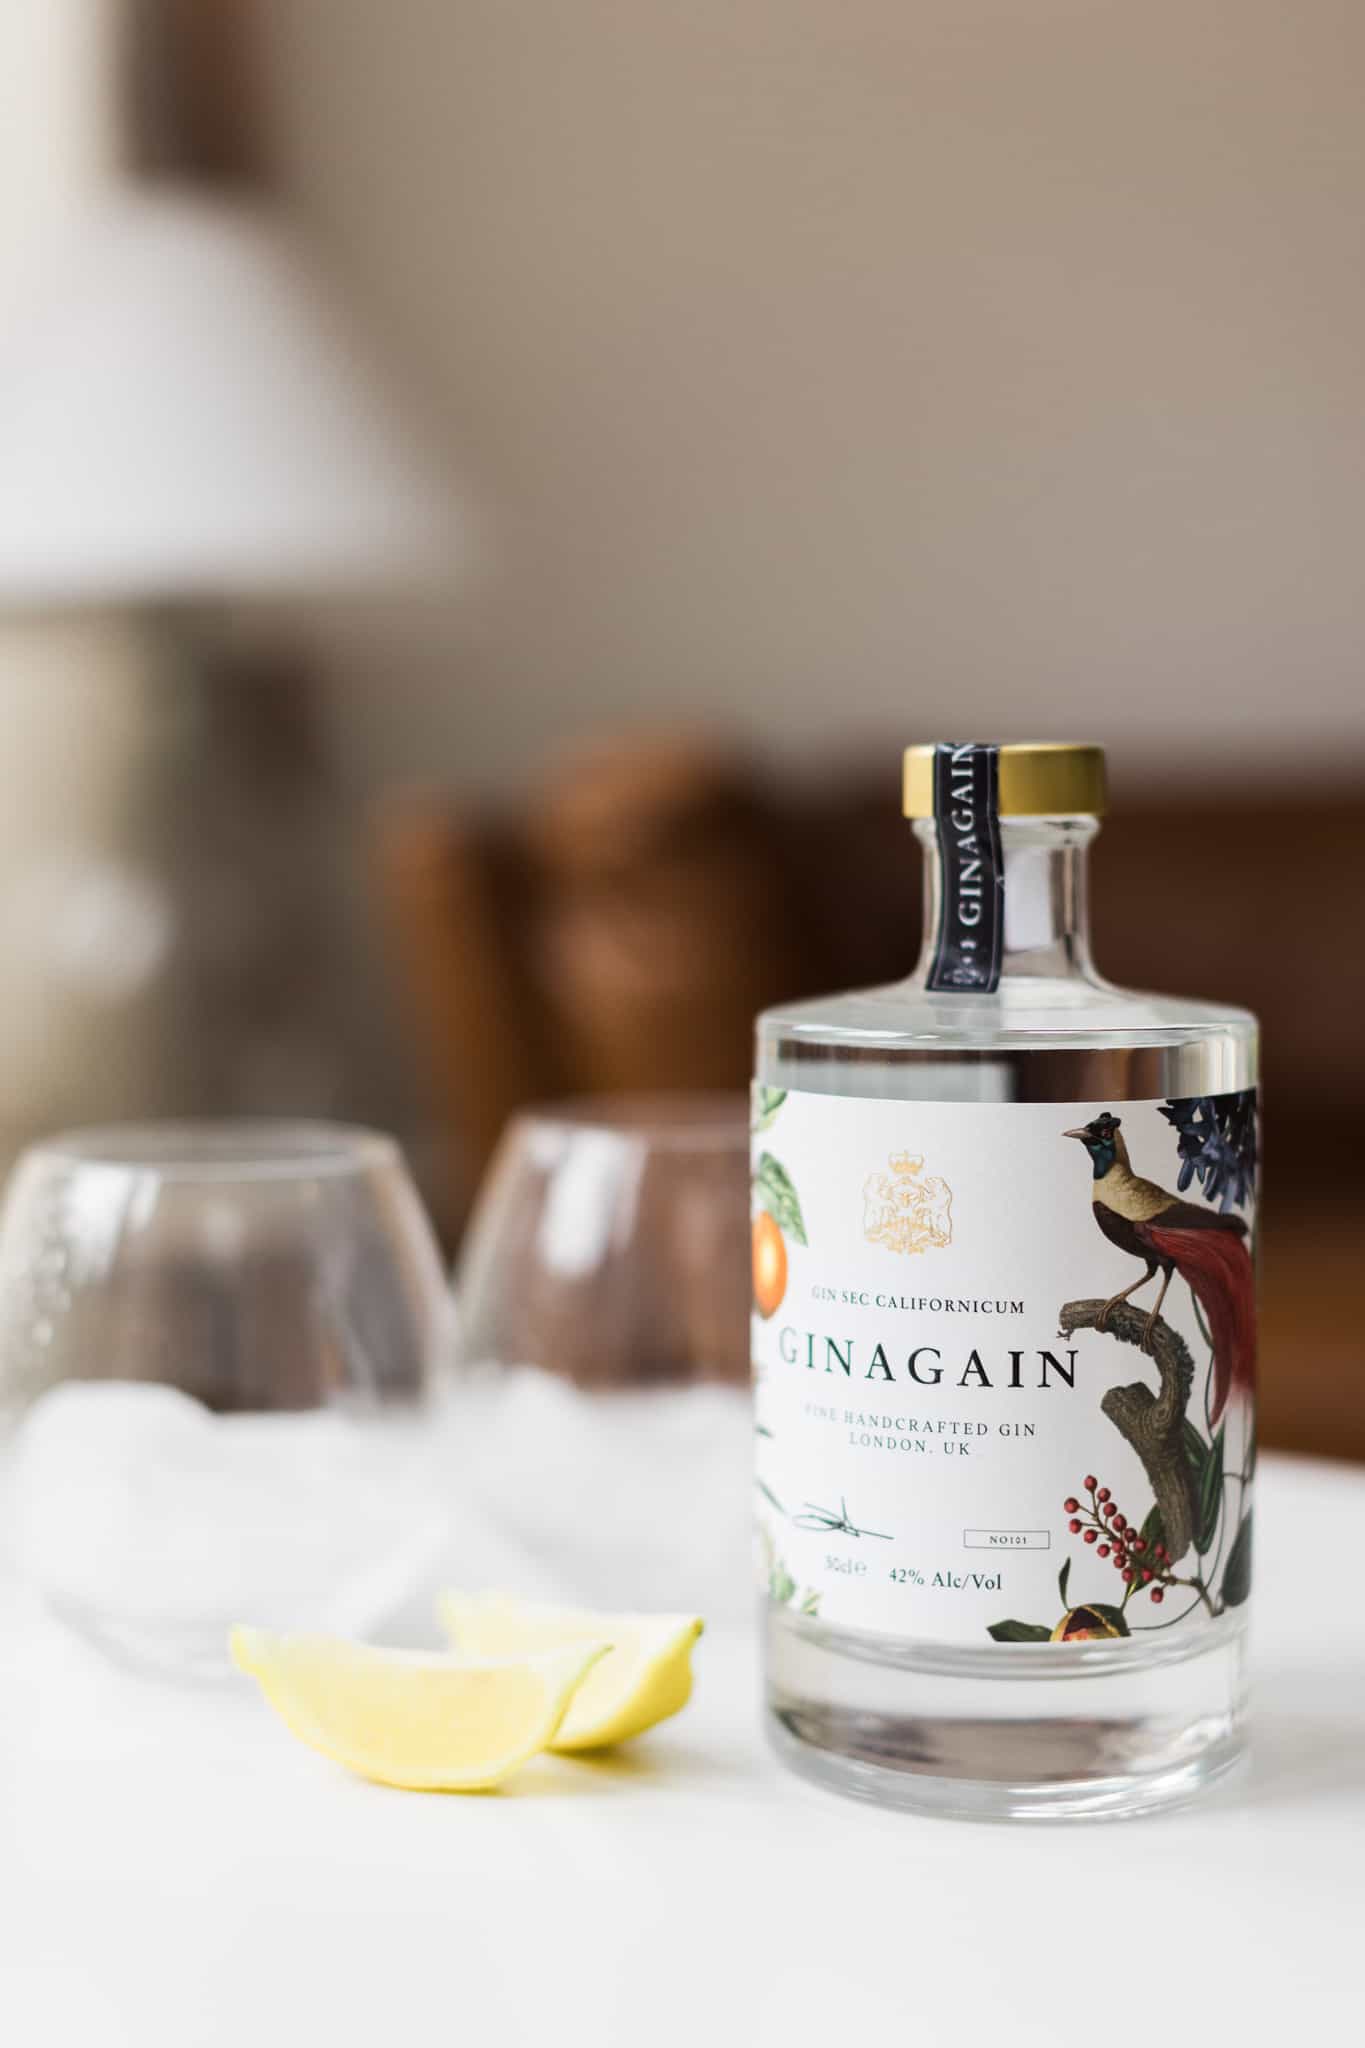 A bottle of Ginagain gin sits on a white table with two glasses and a slice of lemon